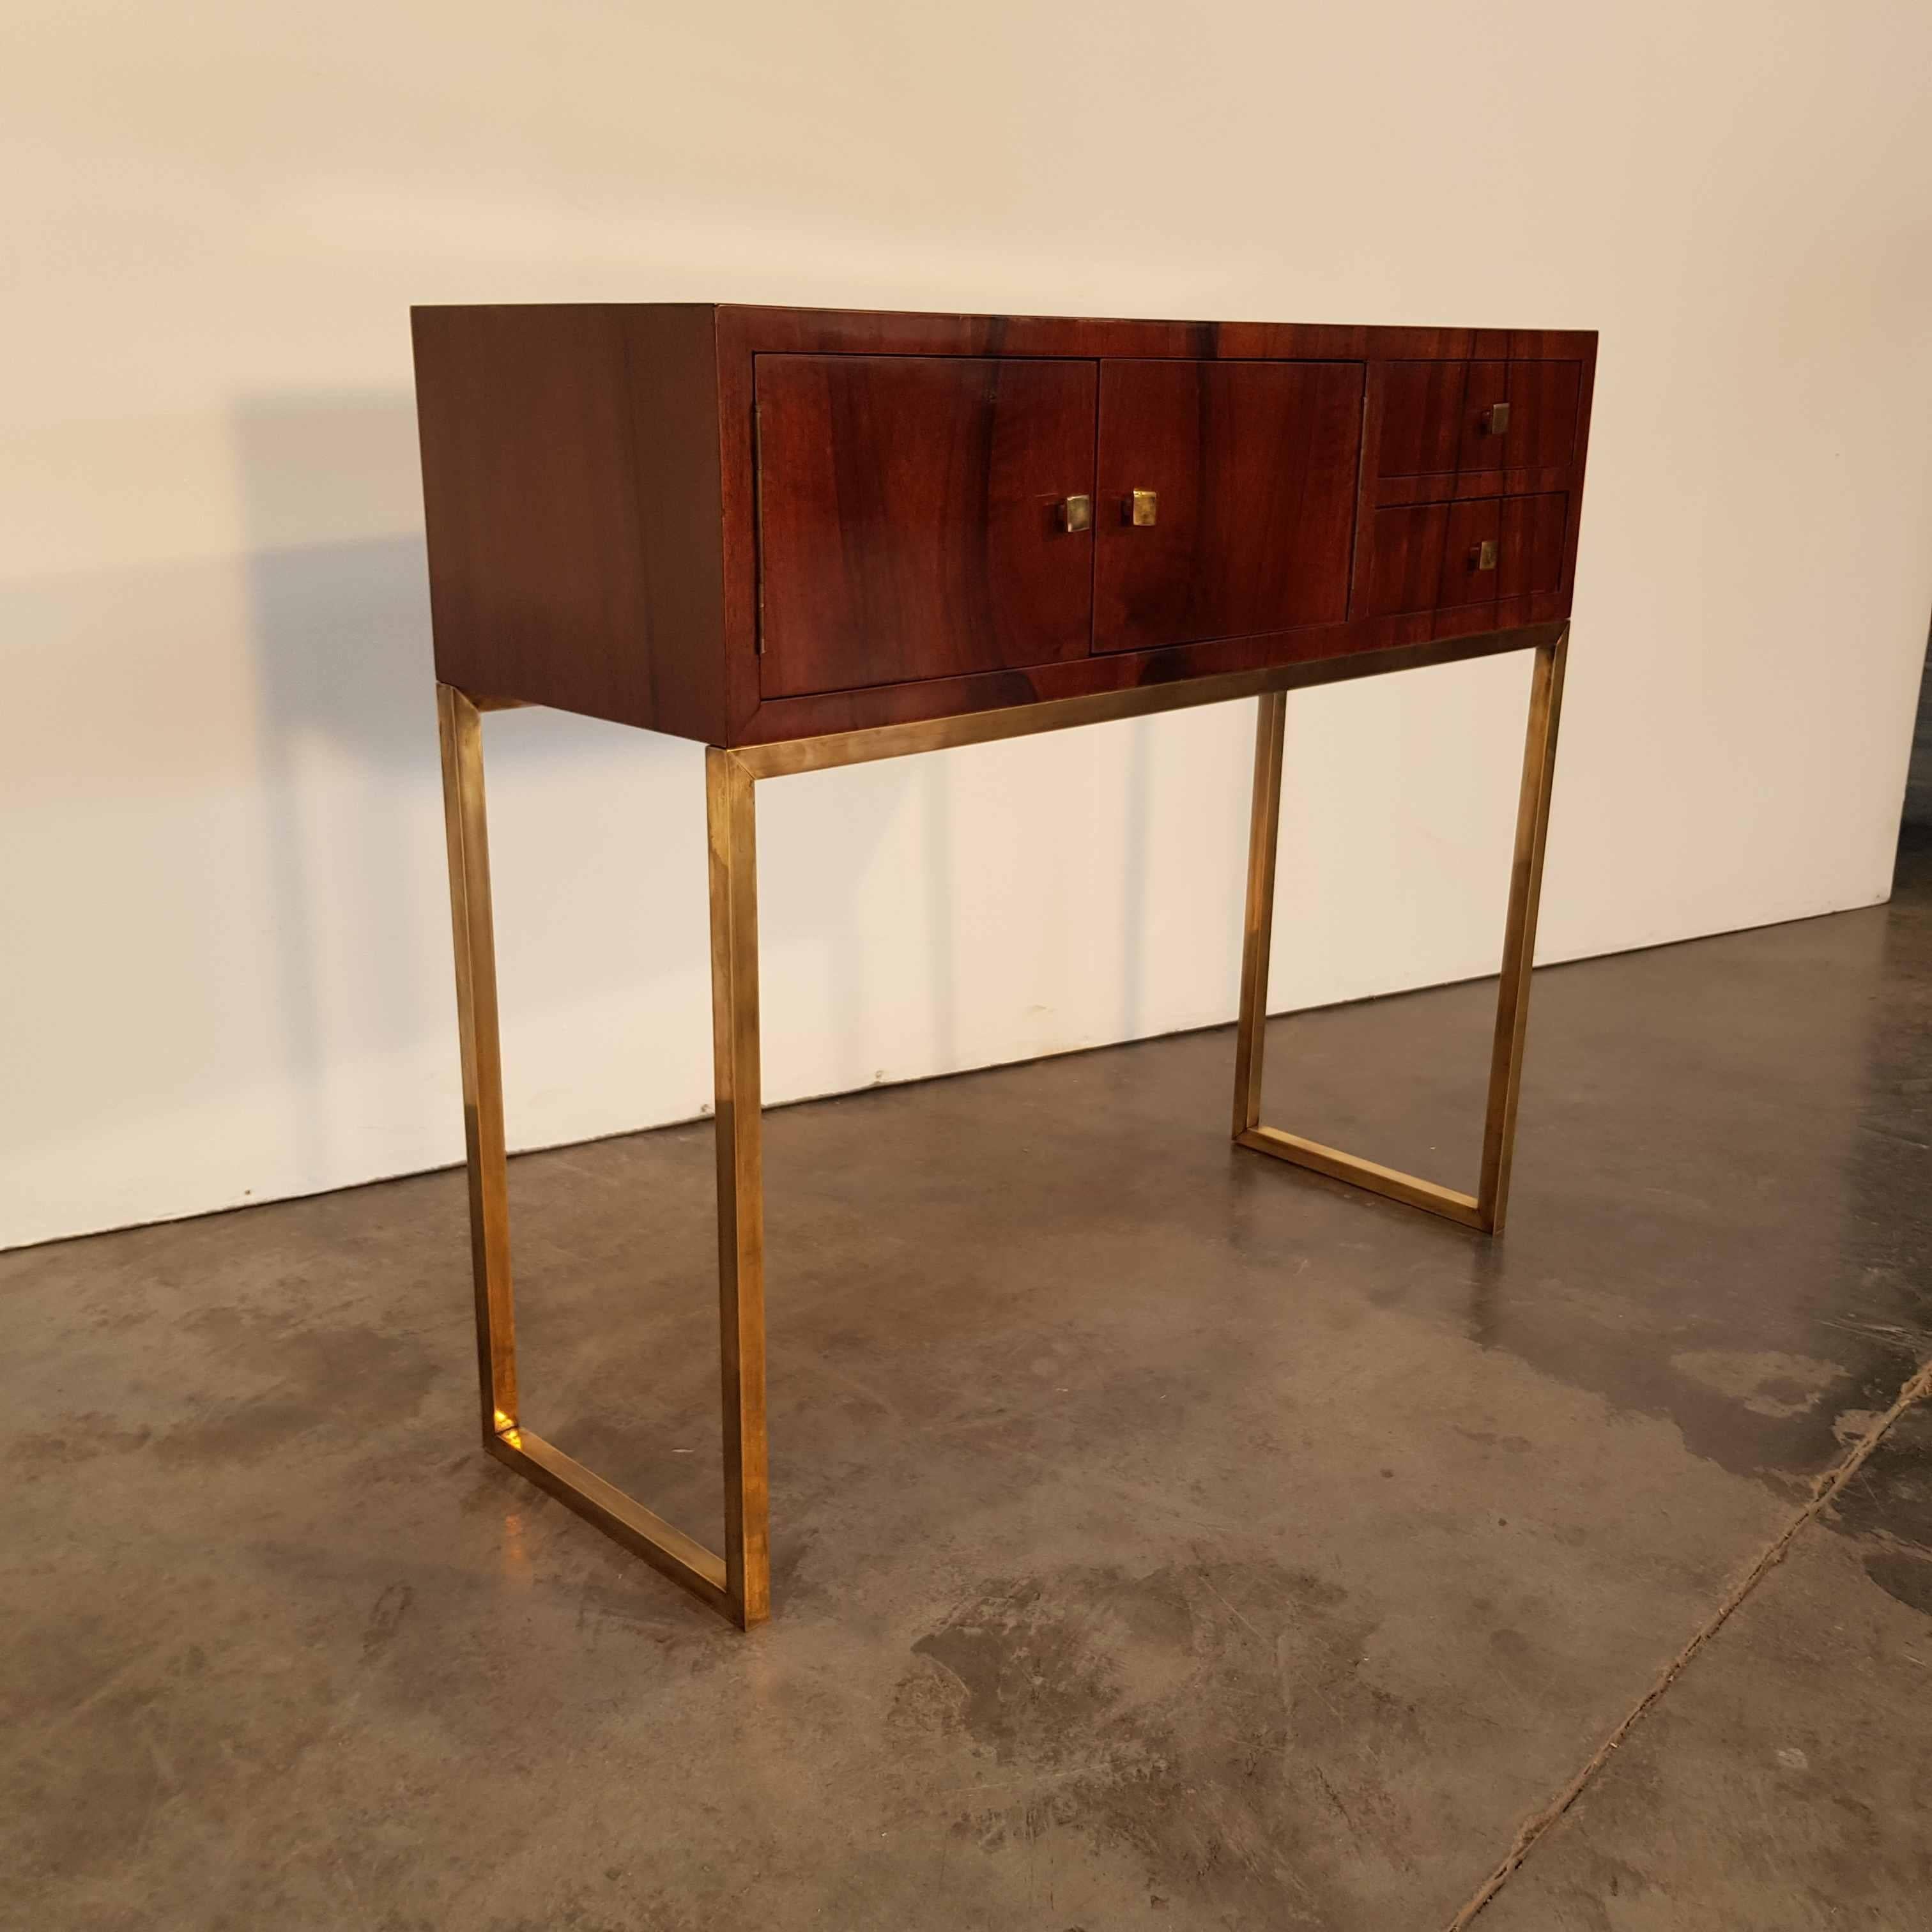 Hungarian Bauhaus Console with Hand-Polished Walnut Veneer on Brass Legs In Good Condition For Sale In Budapest, Budapest